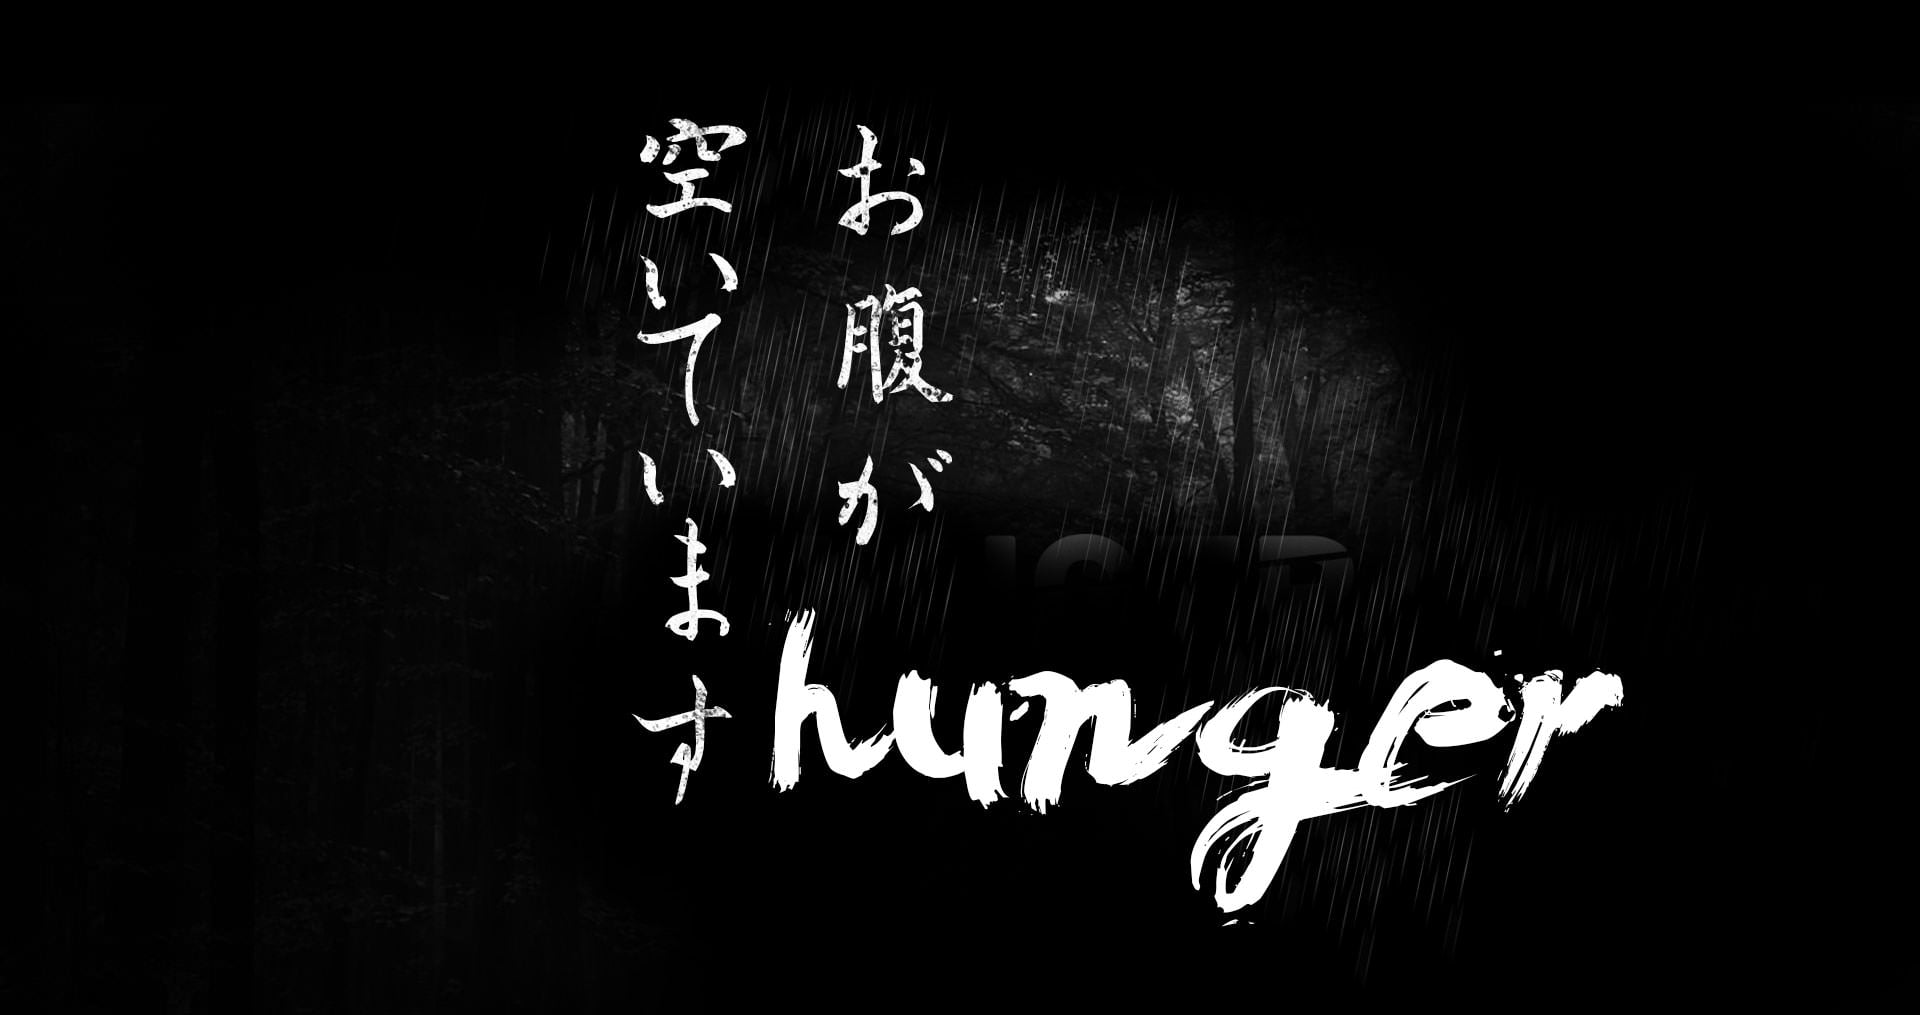 «Hunger» is now available for purchase